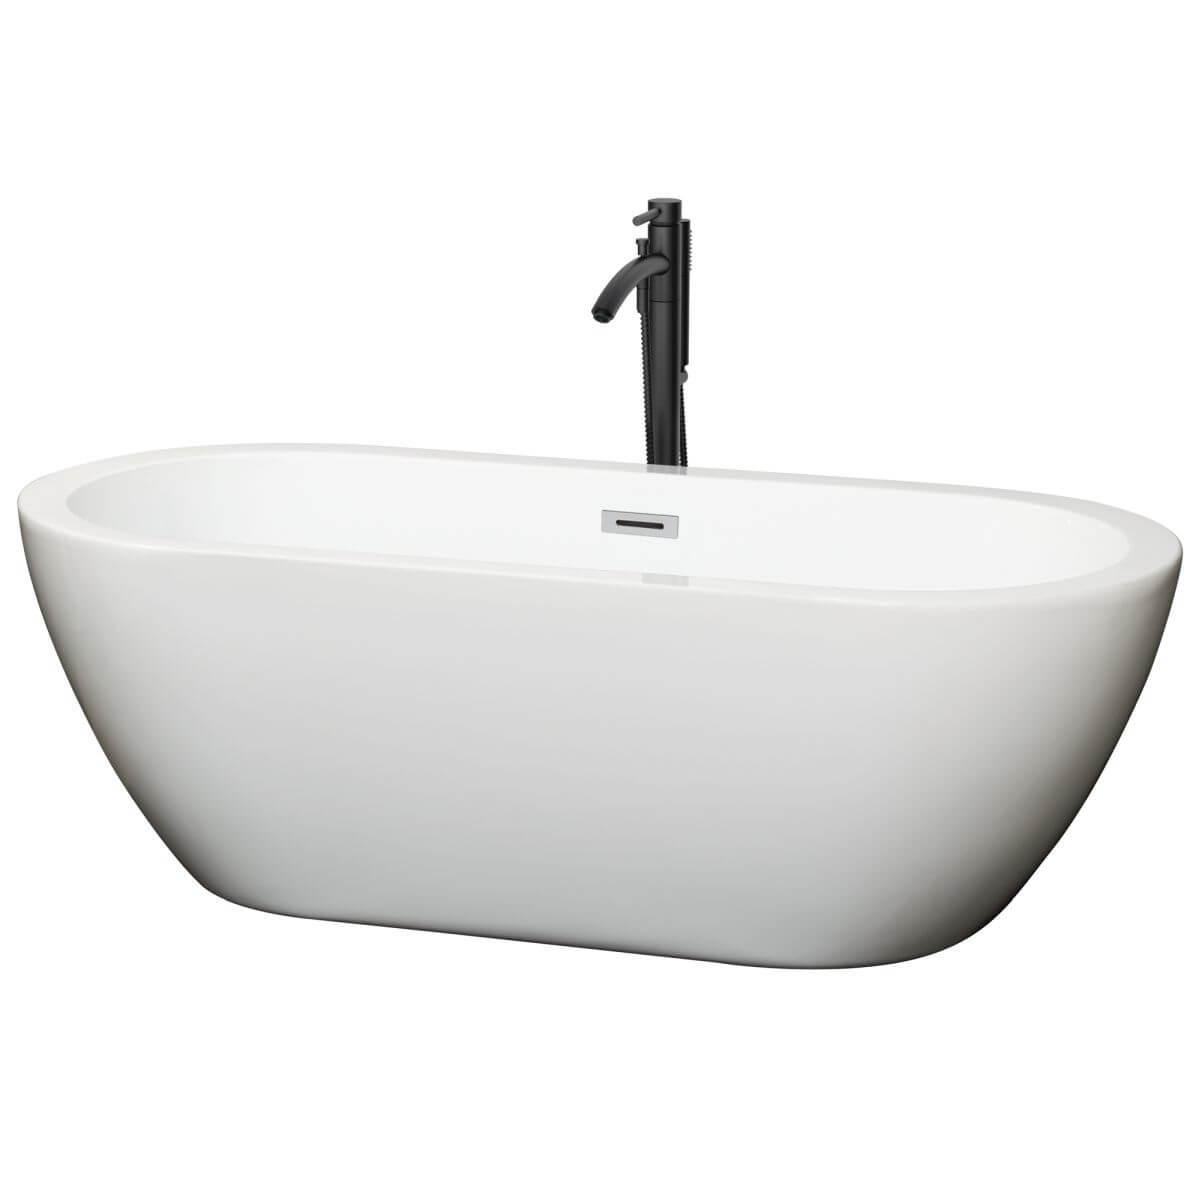 Wyndham Collection Soho 68 inch Freestanding Bathtub in White with Polished Chrome Trim and Floor Mounted Faucet in Matte Black - WCOBT100268PCATPBK